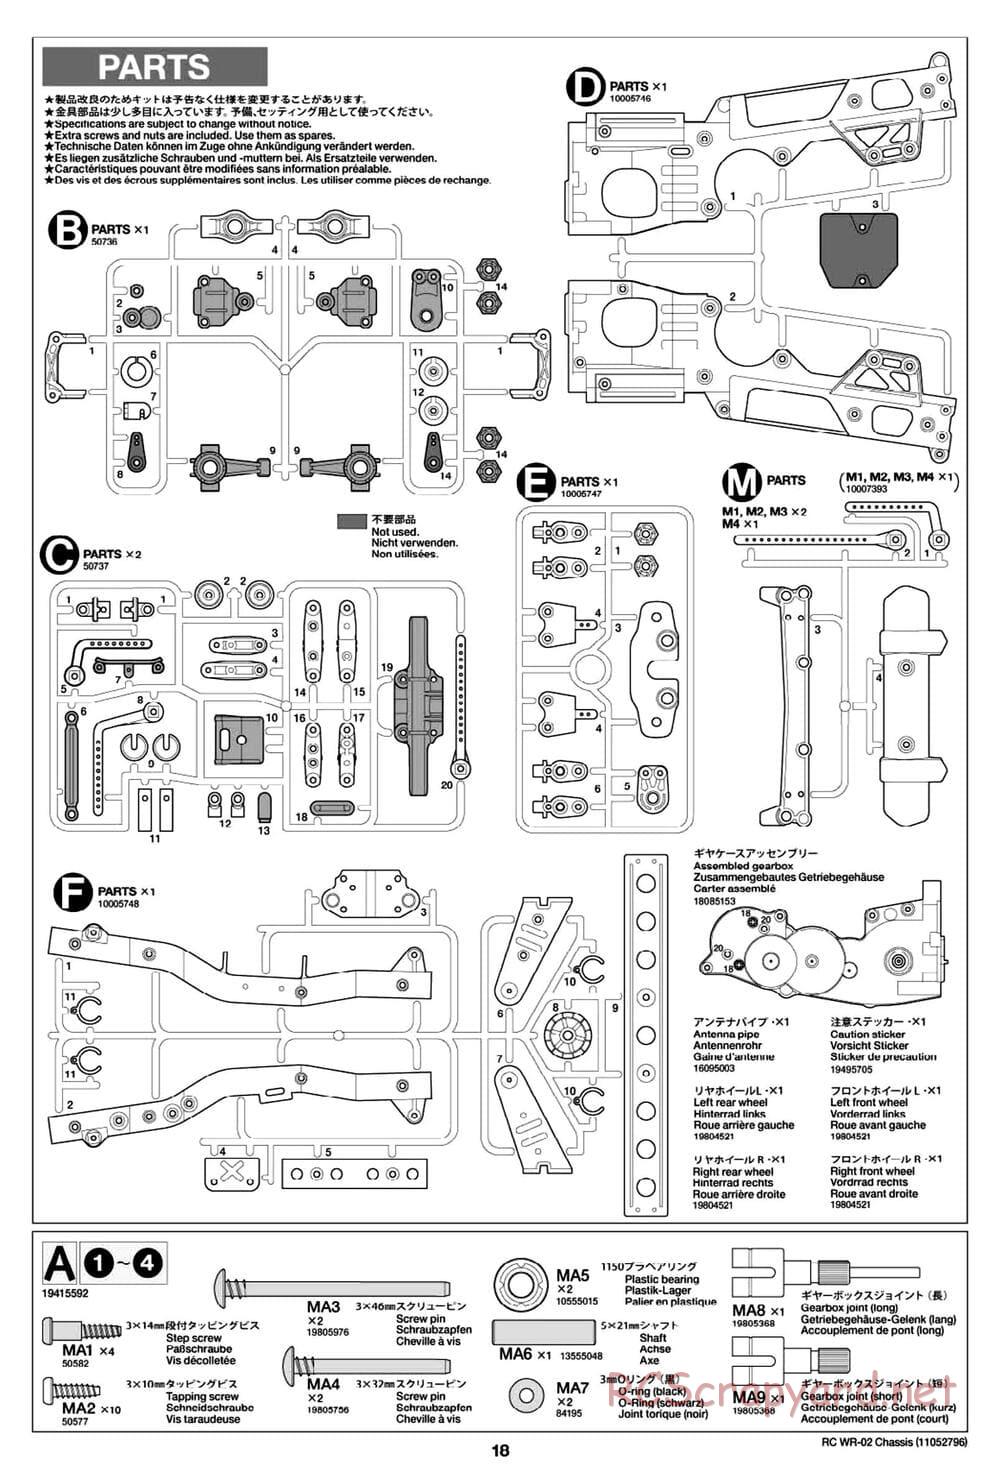 Tamiya - VW Type 2 Wheelie (T1) - WR-02 Chassis - Manual - Page 18